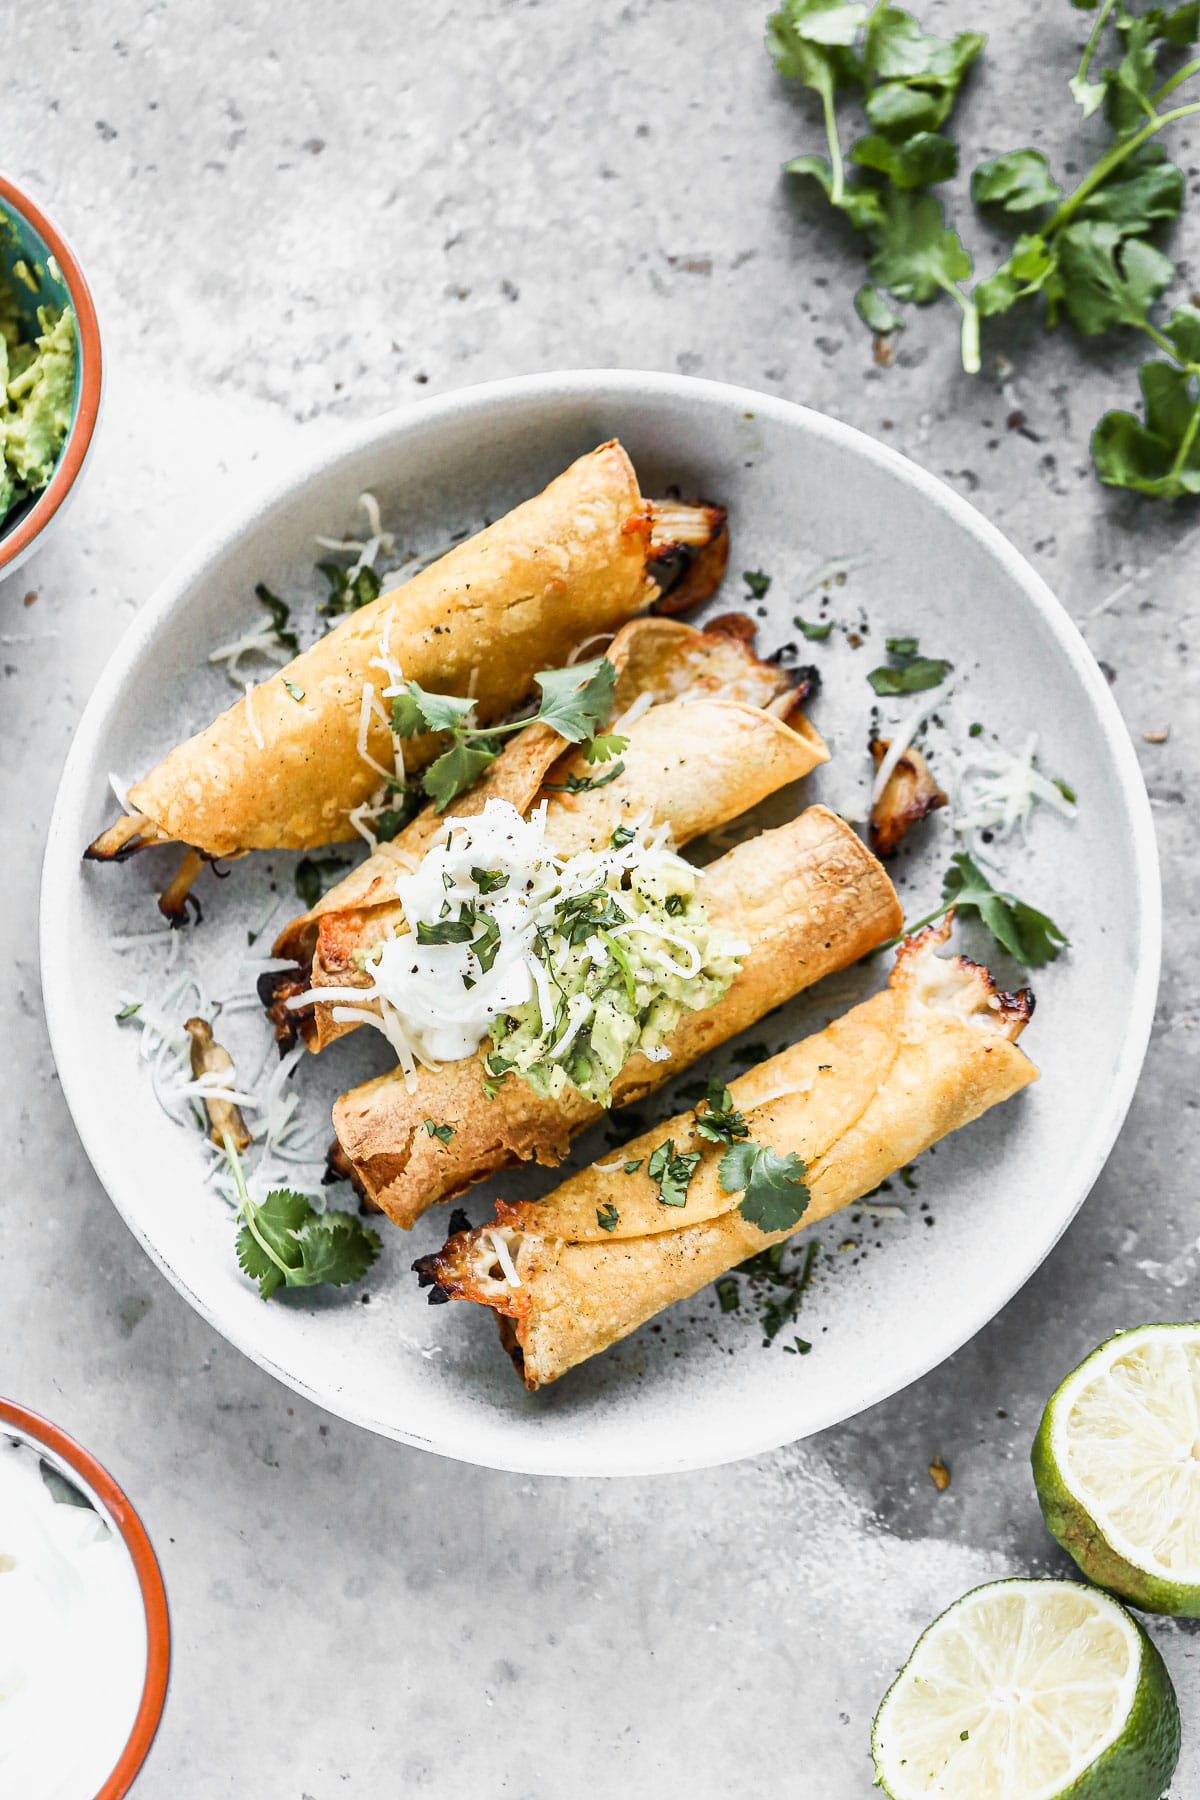 Irresistibly crispy on the outside and filled with shredded honey lime chicken and plenty of melted monterey jack cheese on the inside, our Air Fryer Taquitos are the perfect Game Day snack. Serve with an easy guac and lime sour cream to finish them off. 